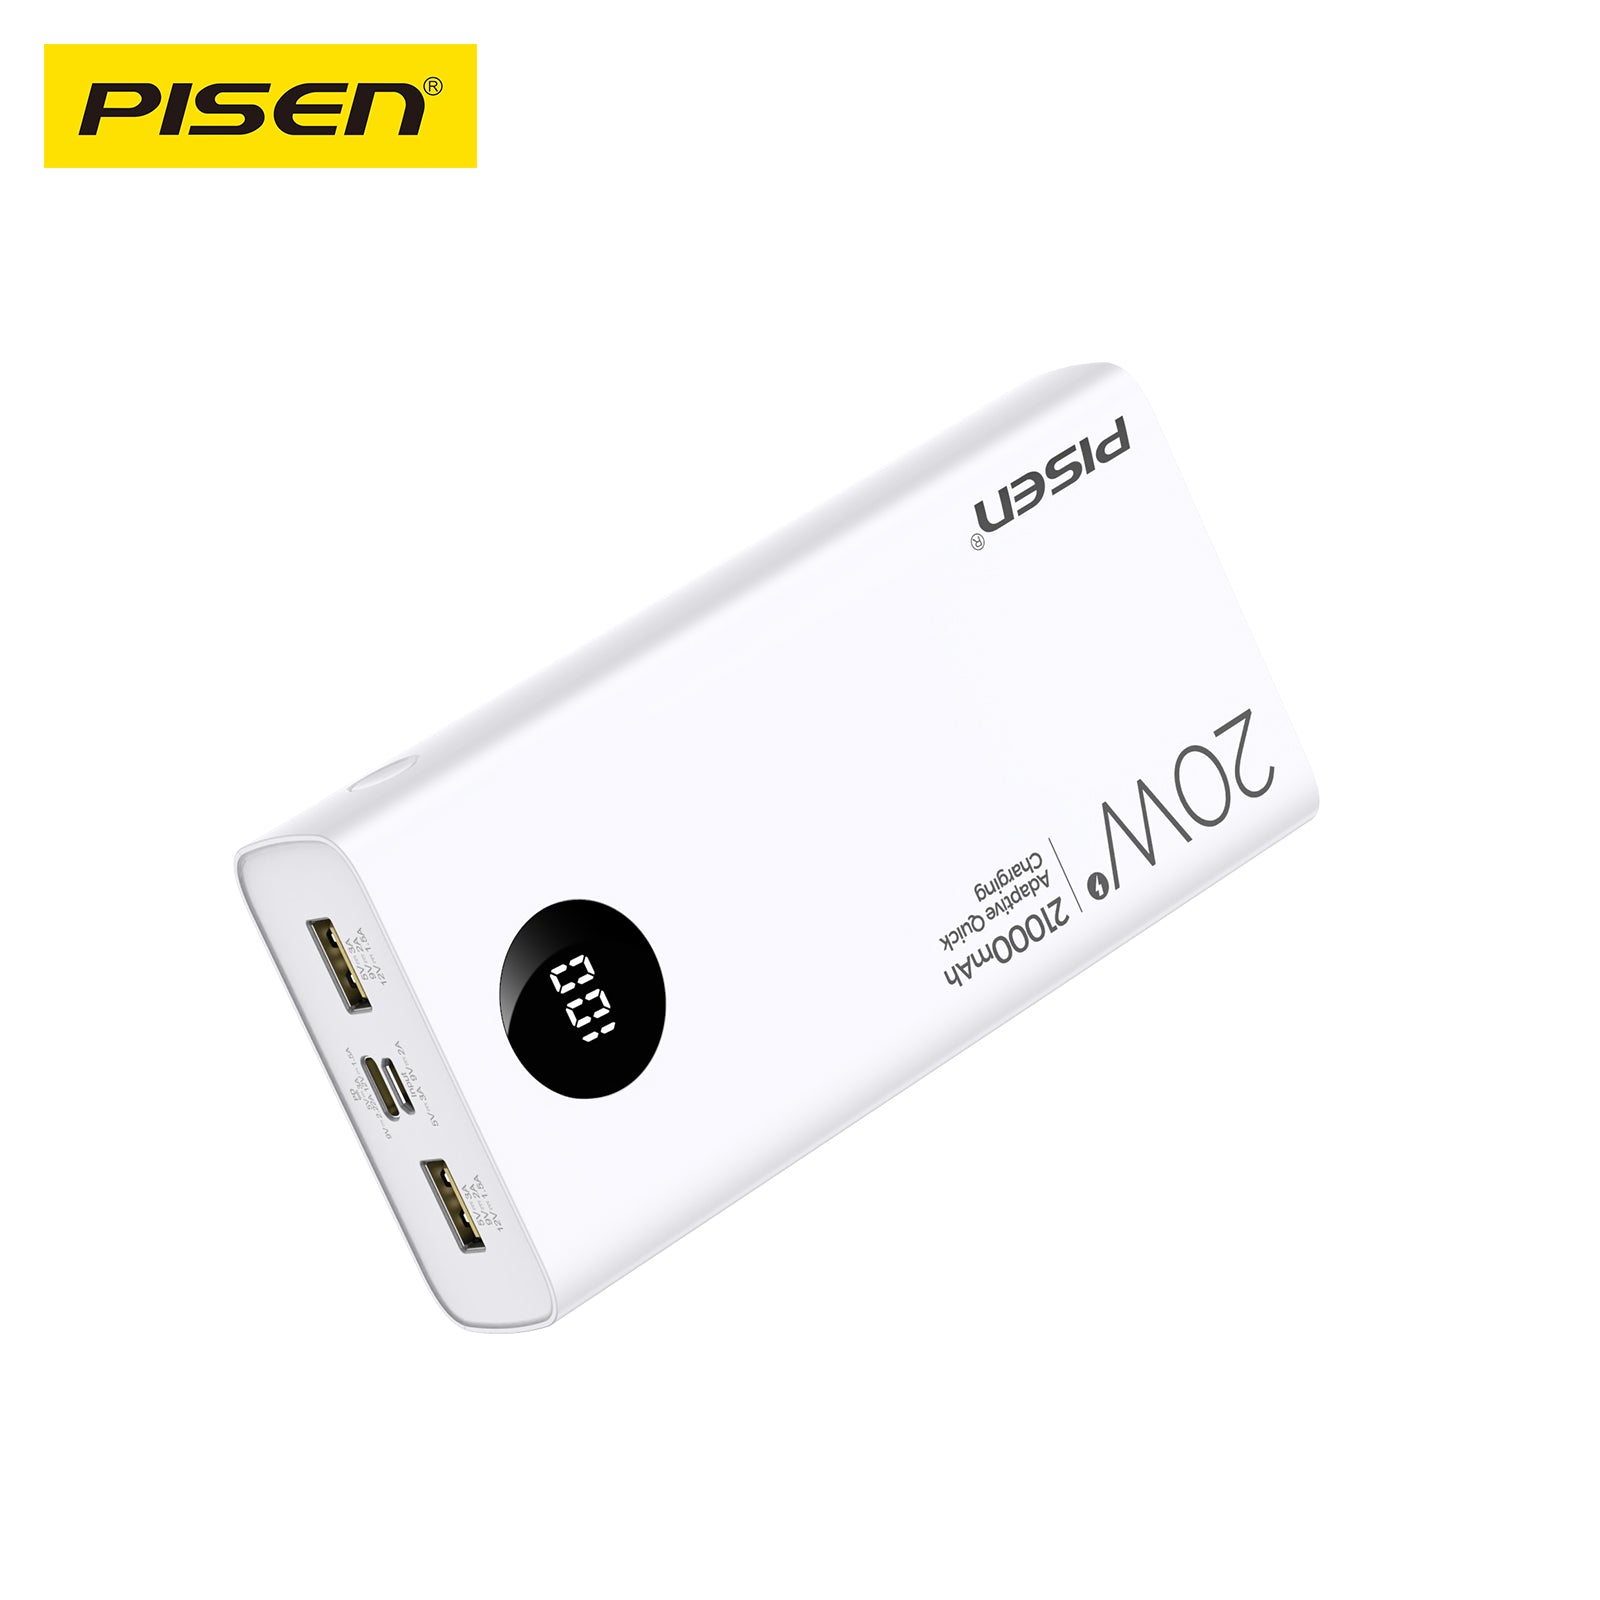 Pisen-Small white fast charge 21000(screen version)(Apple White) paper color box